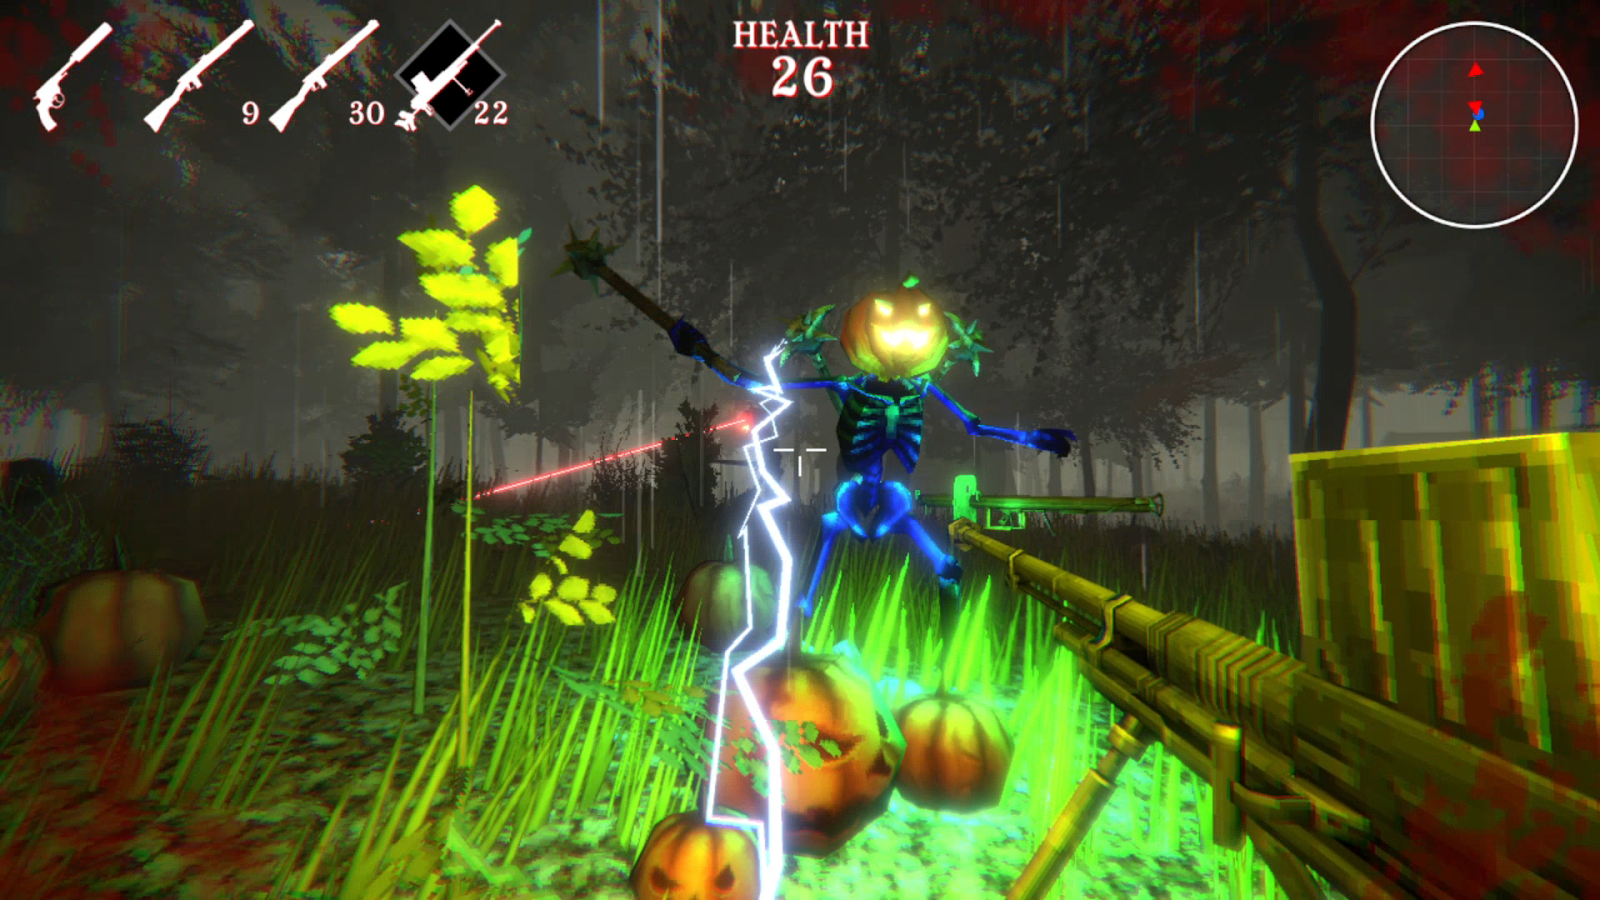 Player is shown in a forest trying to survive attack after attack of pumpkin enemies.